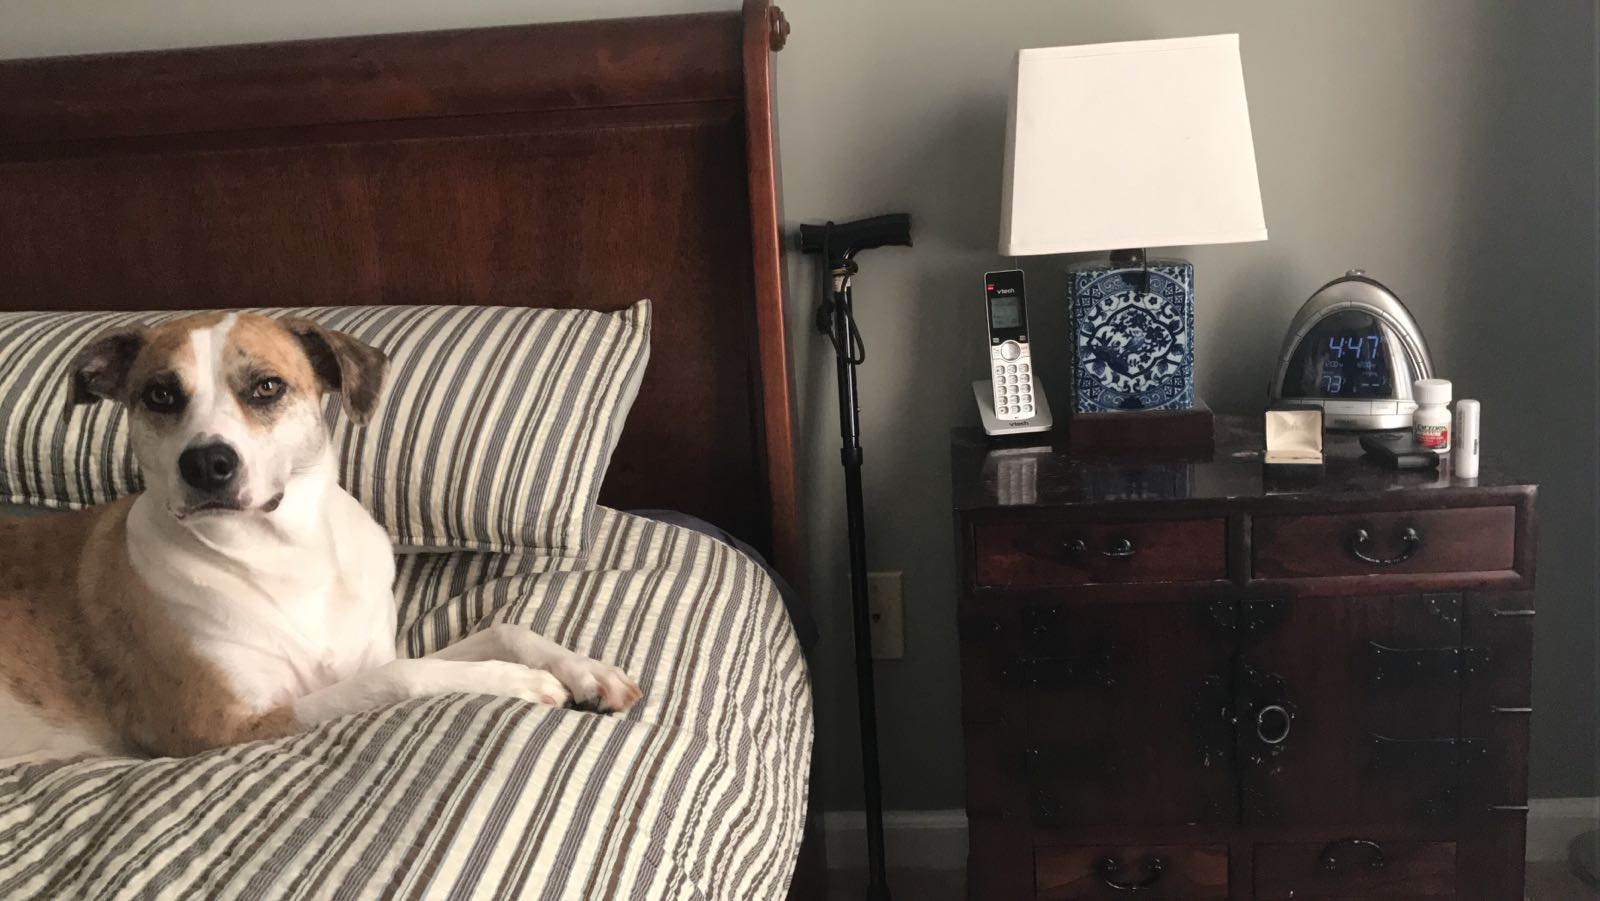 Midlife and The Cane at My Bedside